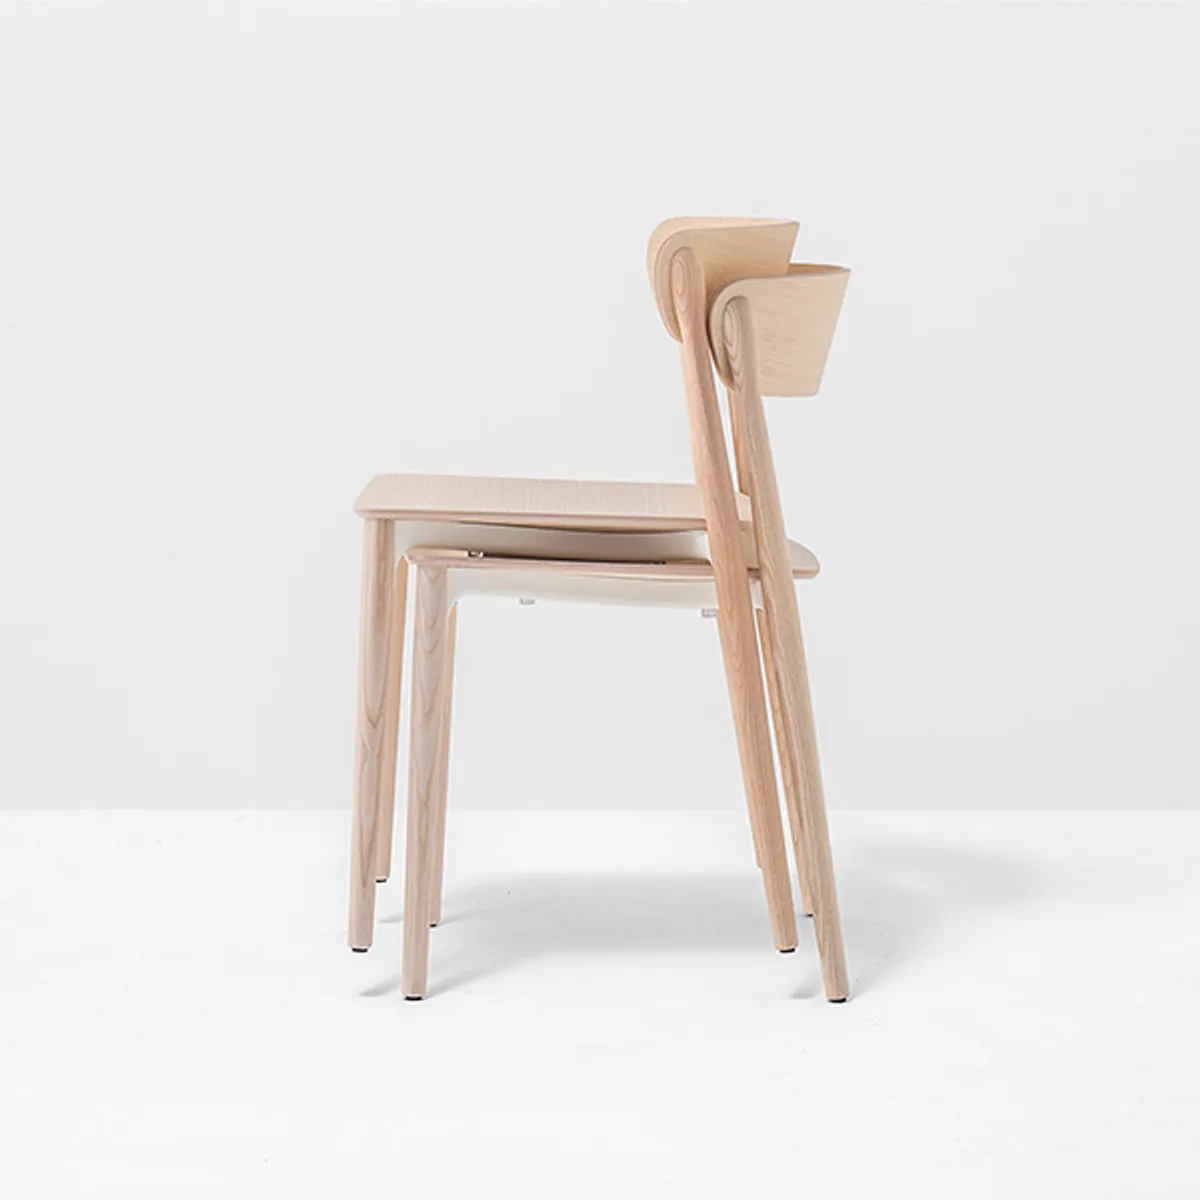 Nemea Chair 2820 Stacking Ashwood Inside Out Contracts